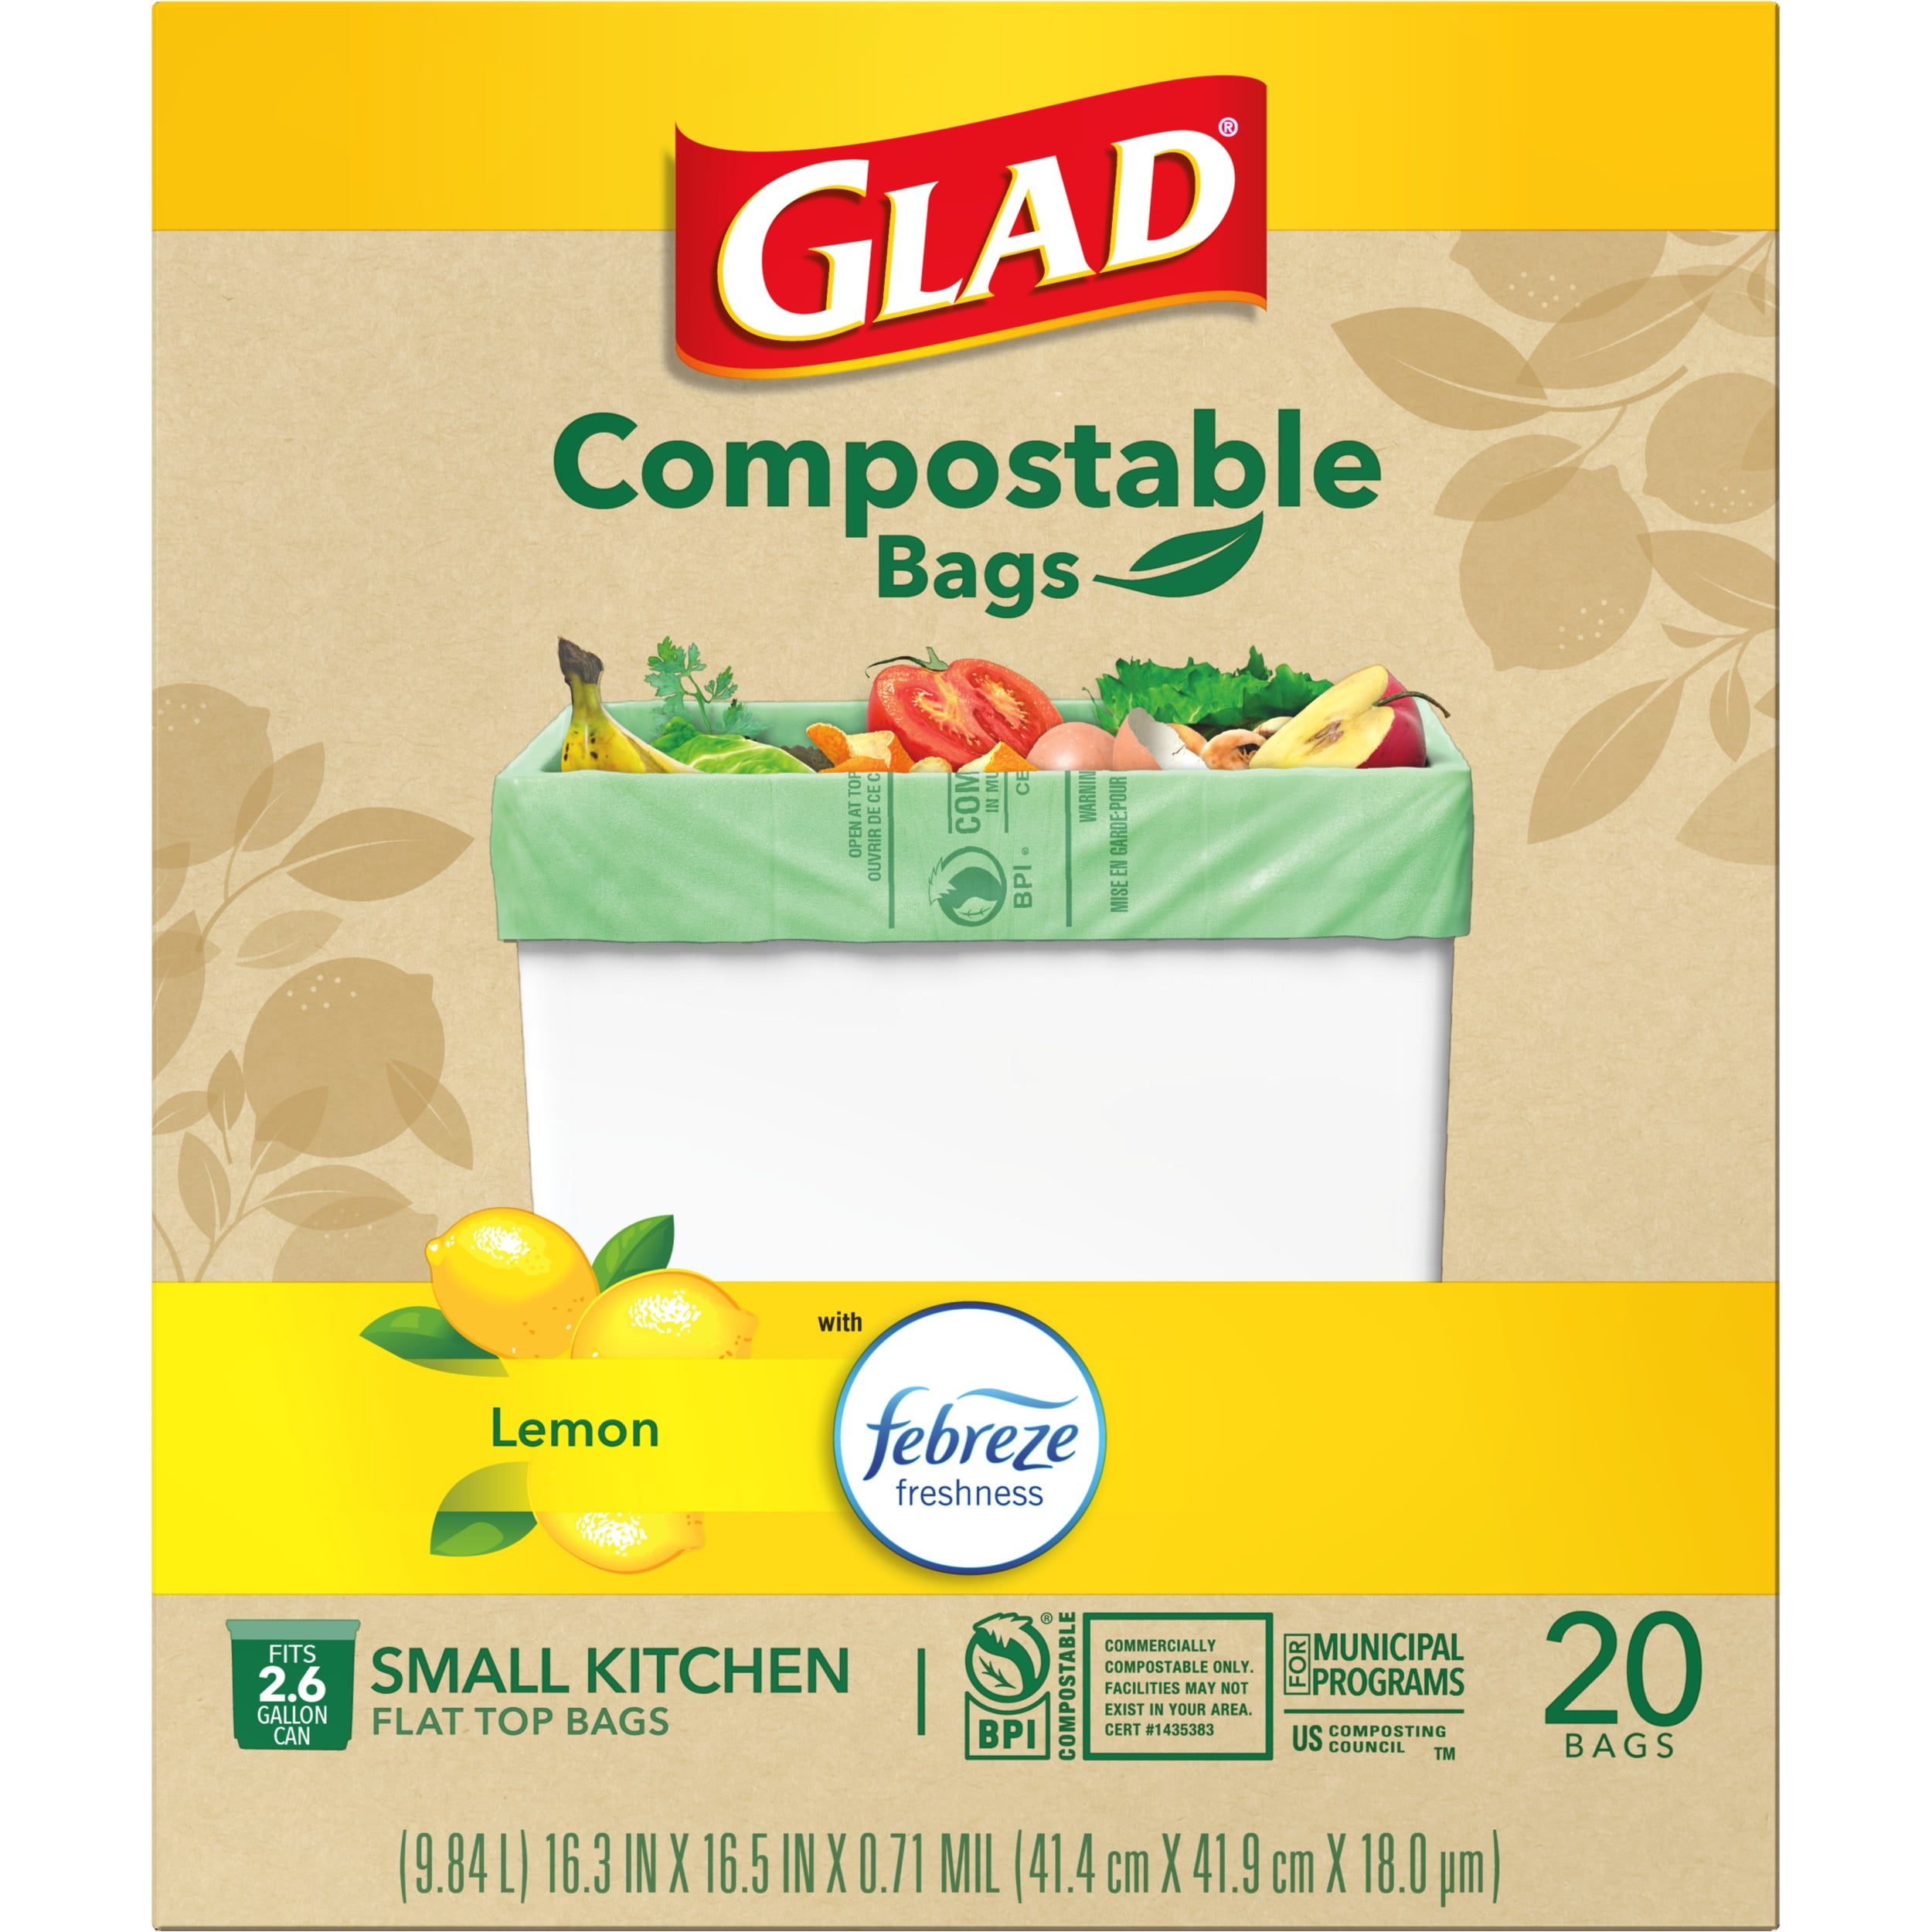 [200 Pack] 2.6 Gallon Biodegradable Trash Bags | Eco-Friendly, Unscented, 10L Small Size Bags for Bathroom Bedroom Office Kitchen Trash Can 